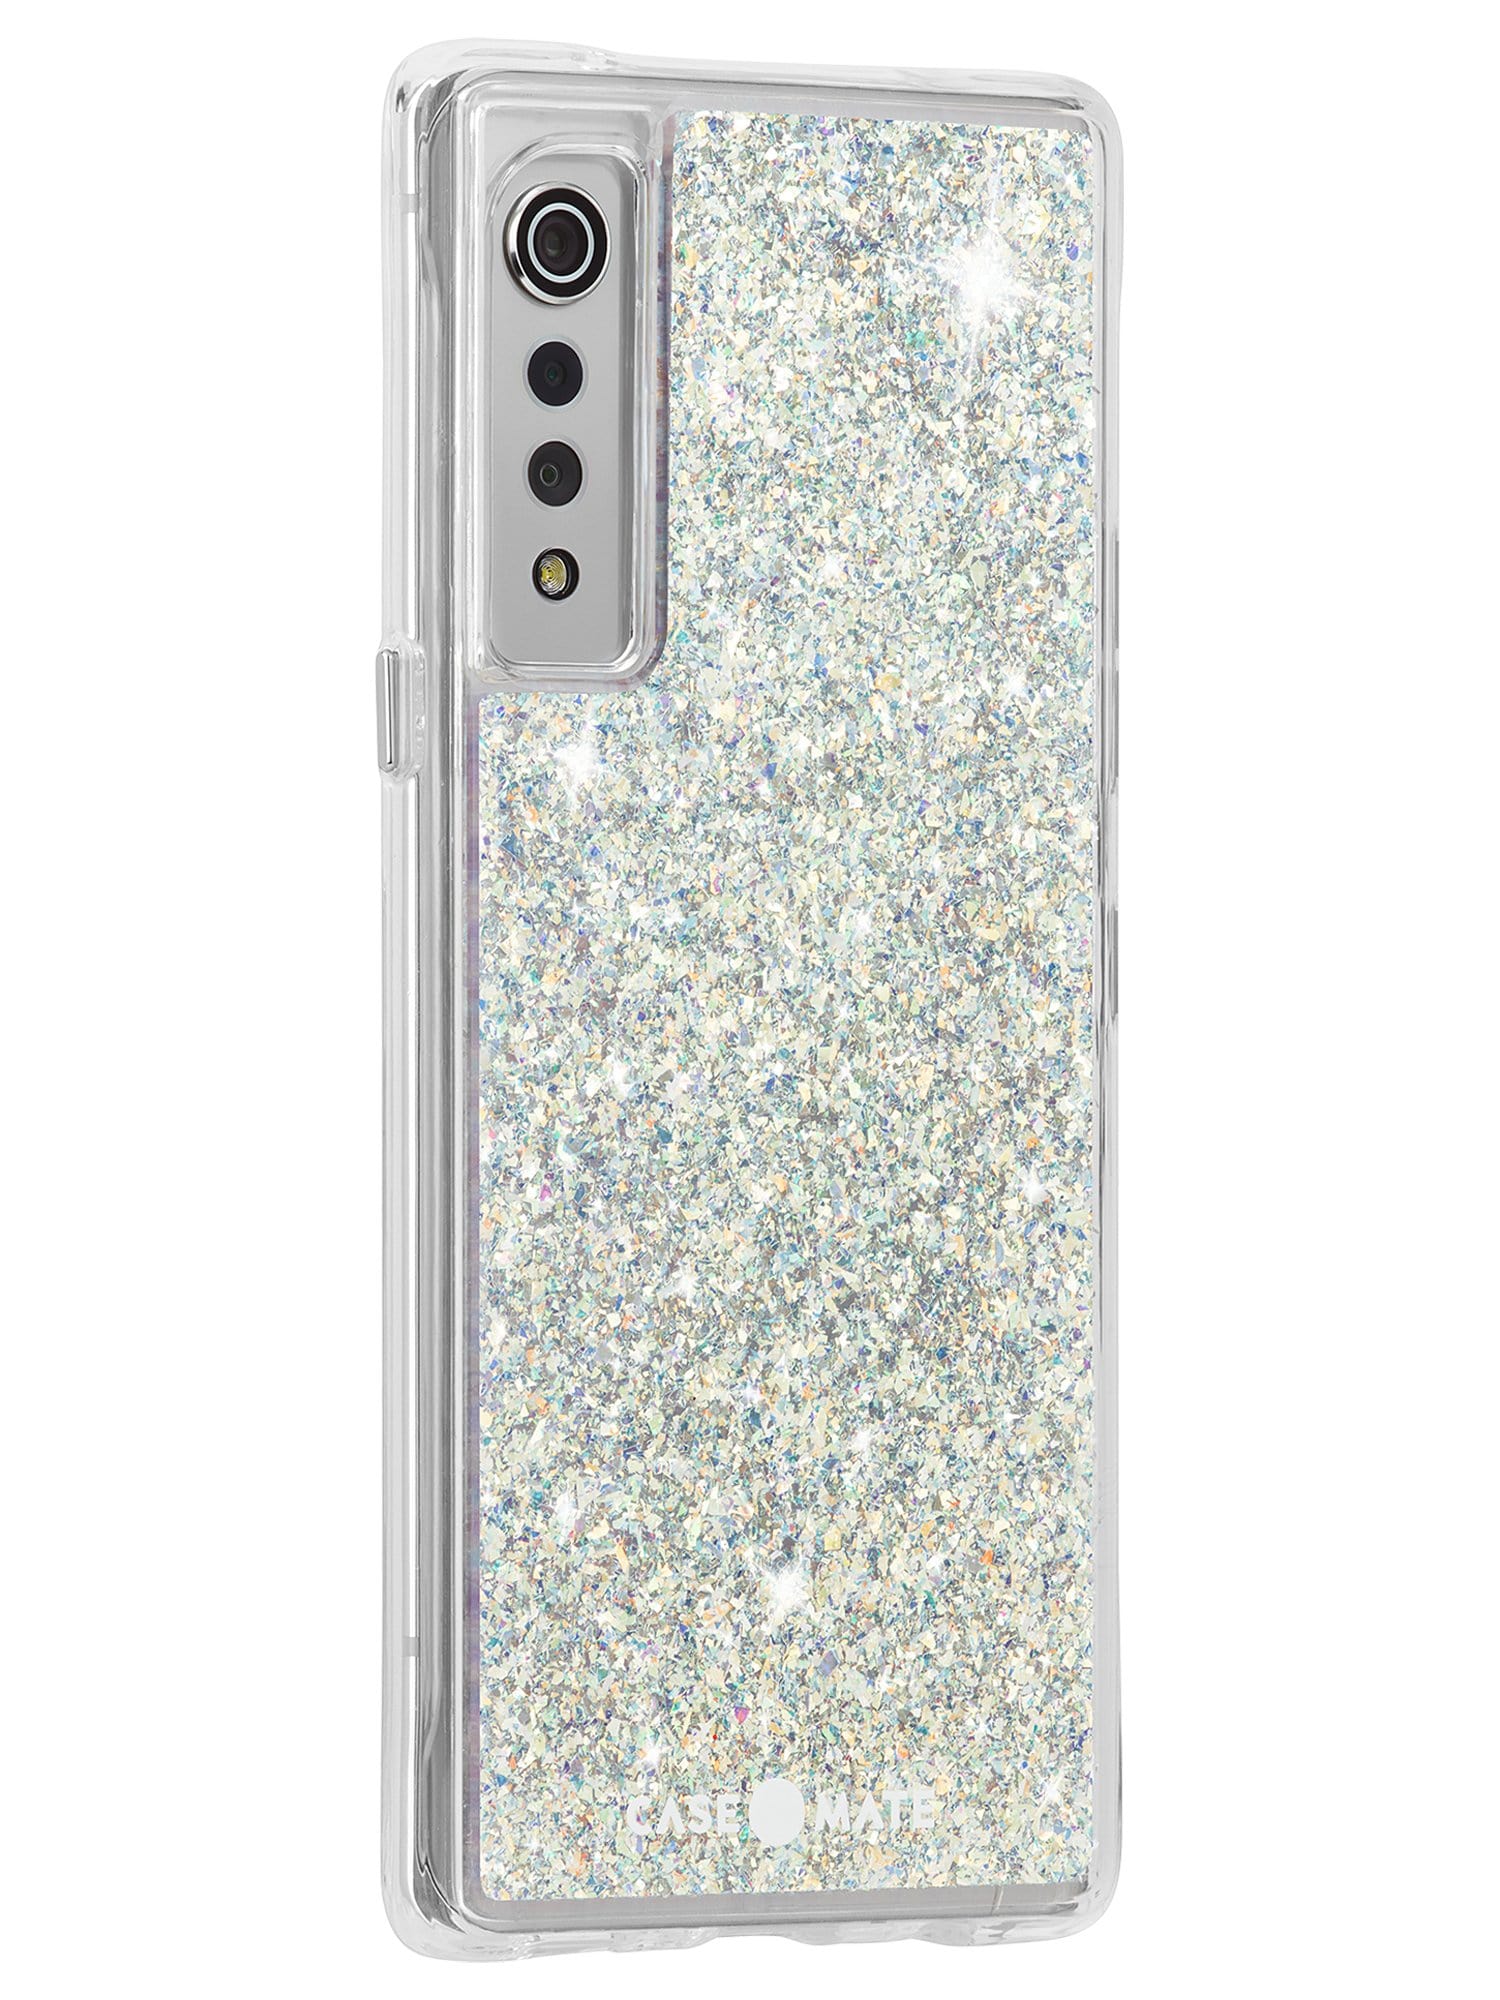 Protective sparkly case. color::Twinkle Stardust